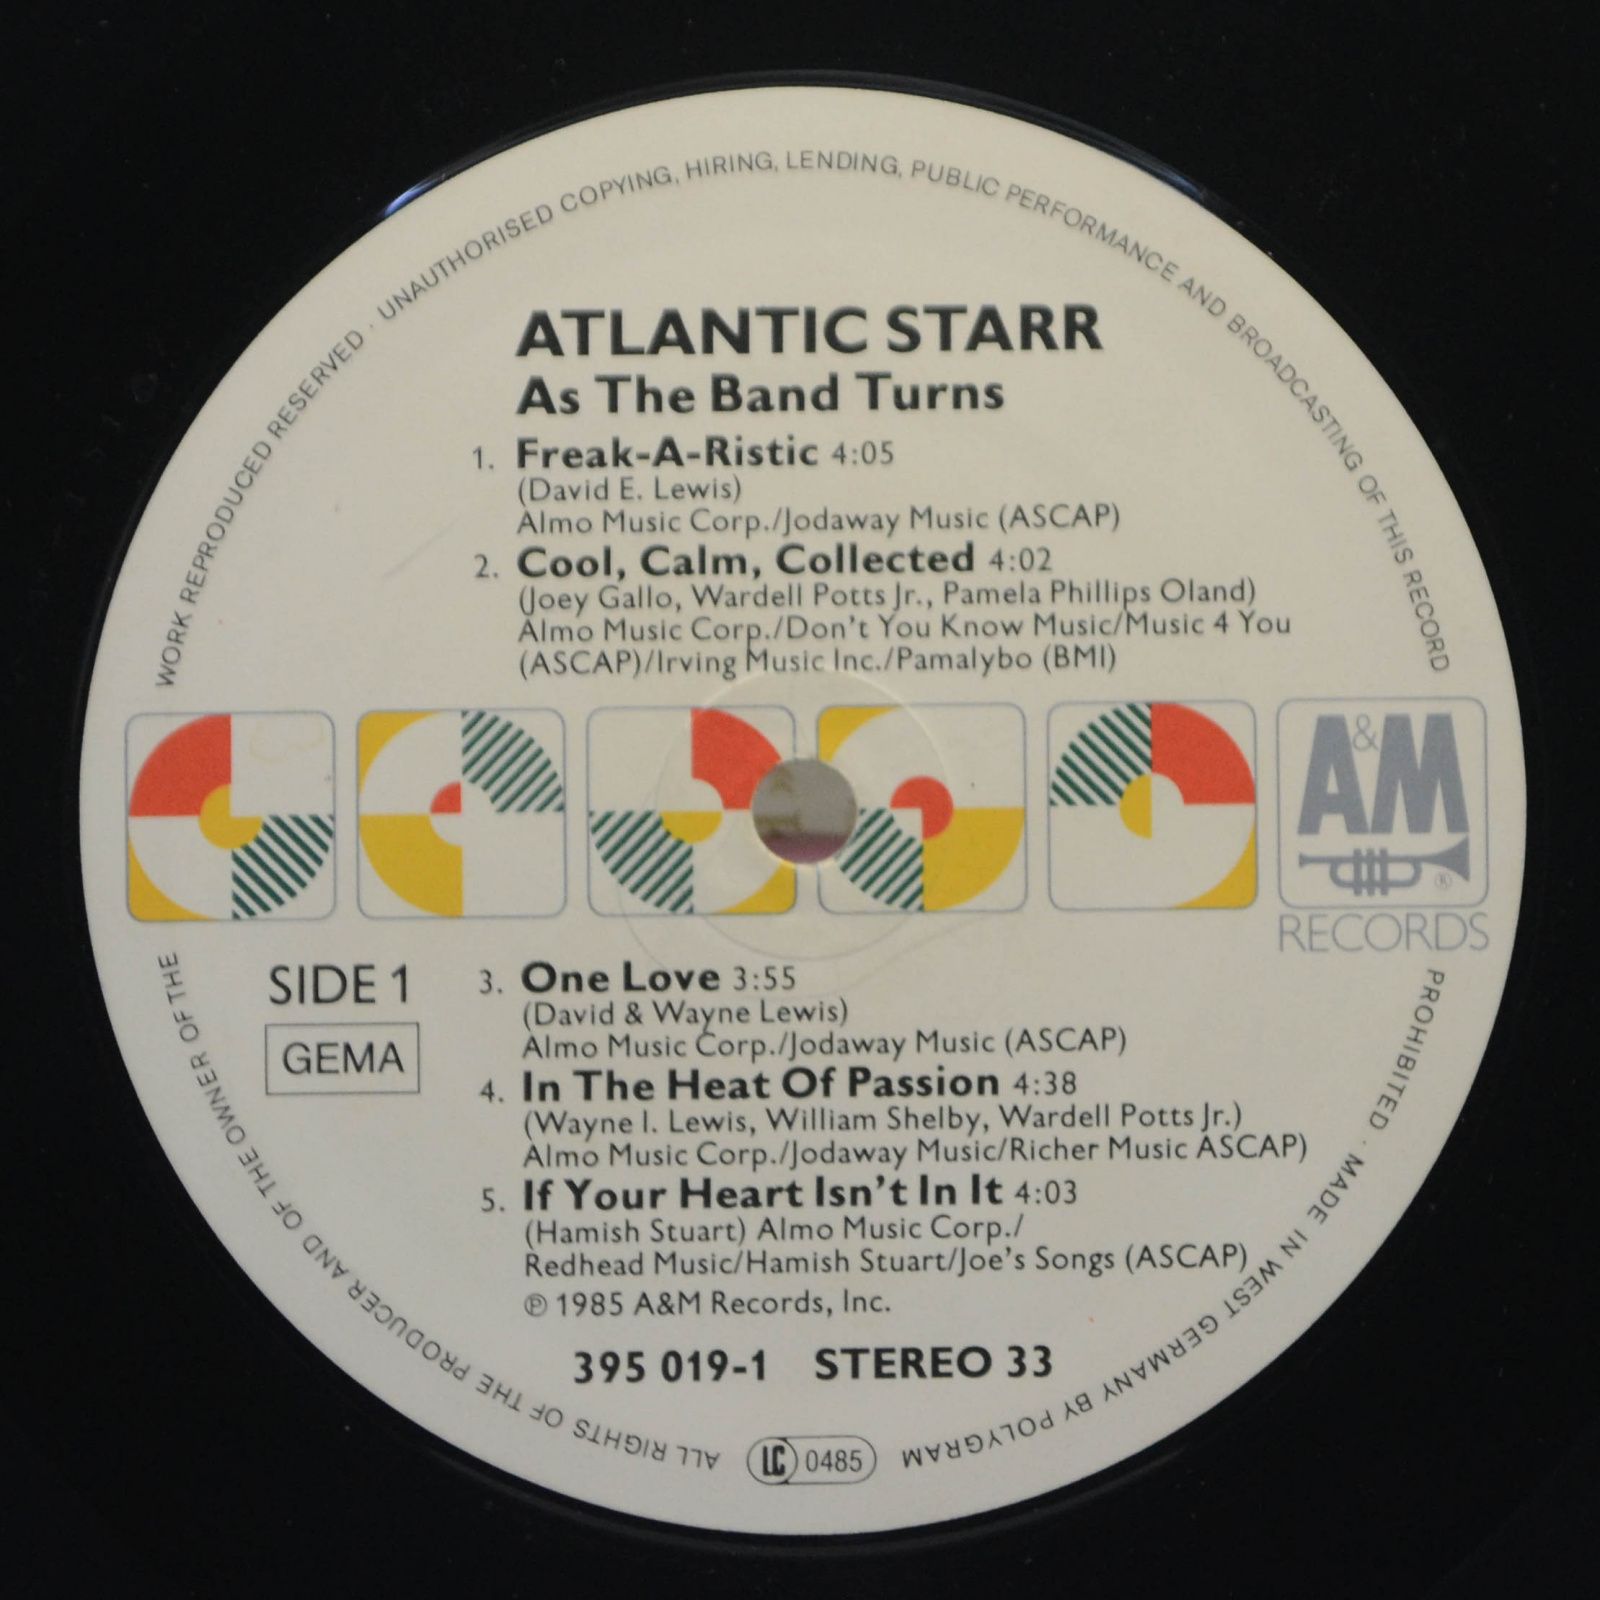 Atlantic Starr — As The Band Turns, 1985